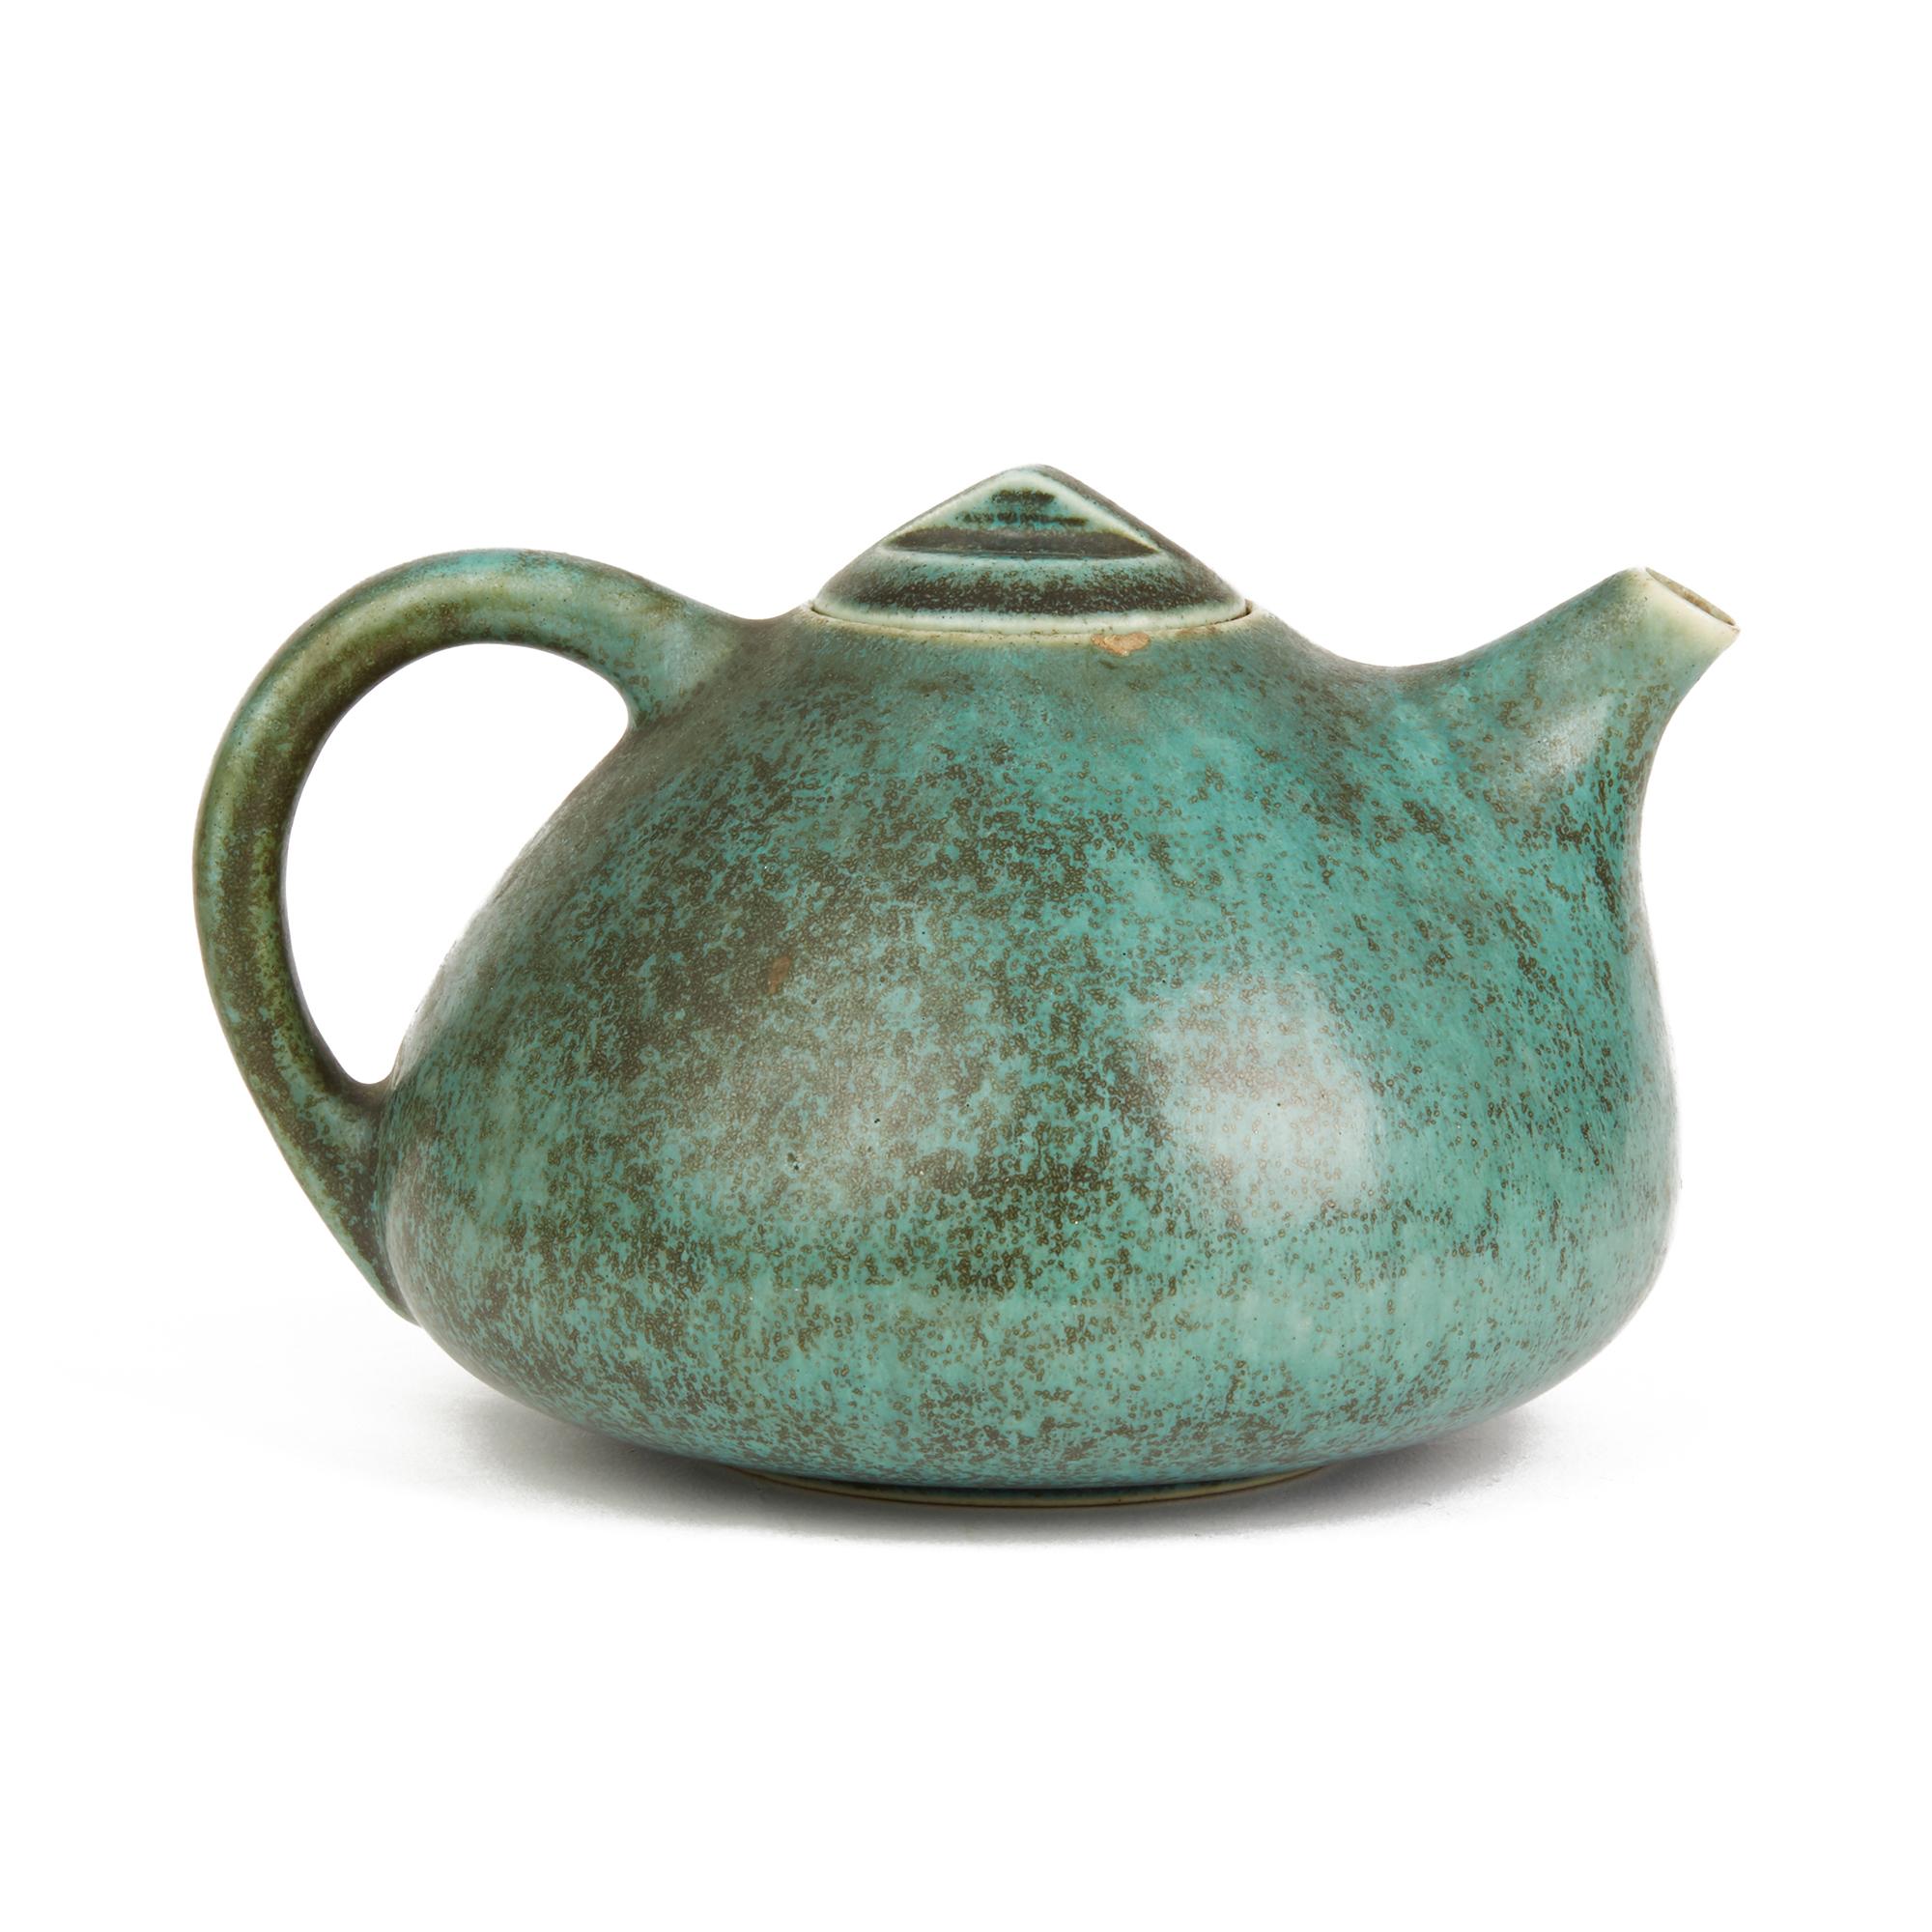 A scarce vintage Danish Saxbo stoneware teapot designed by Eva Stæhr-Nielsen. The teapot of squat rounded form has a fitted angular cover with small pouring spout and loop handle and is decorated in satin mottled brown and green glazes. The teapot